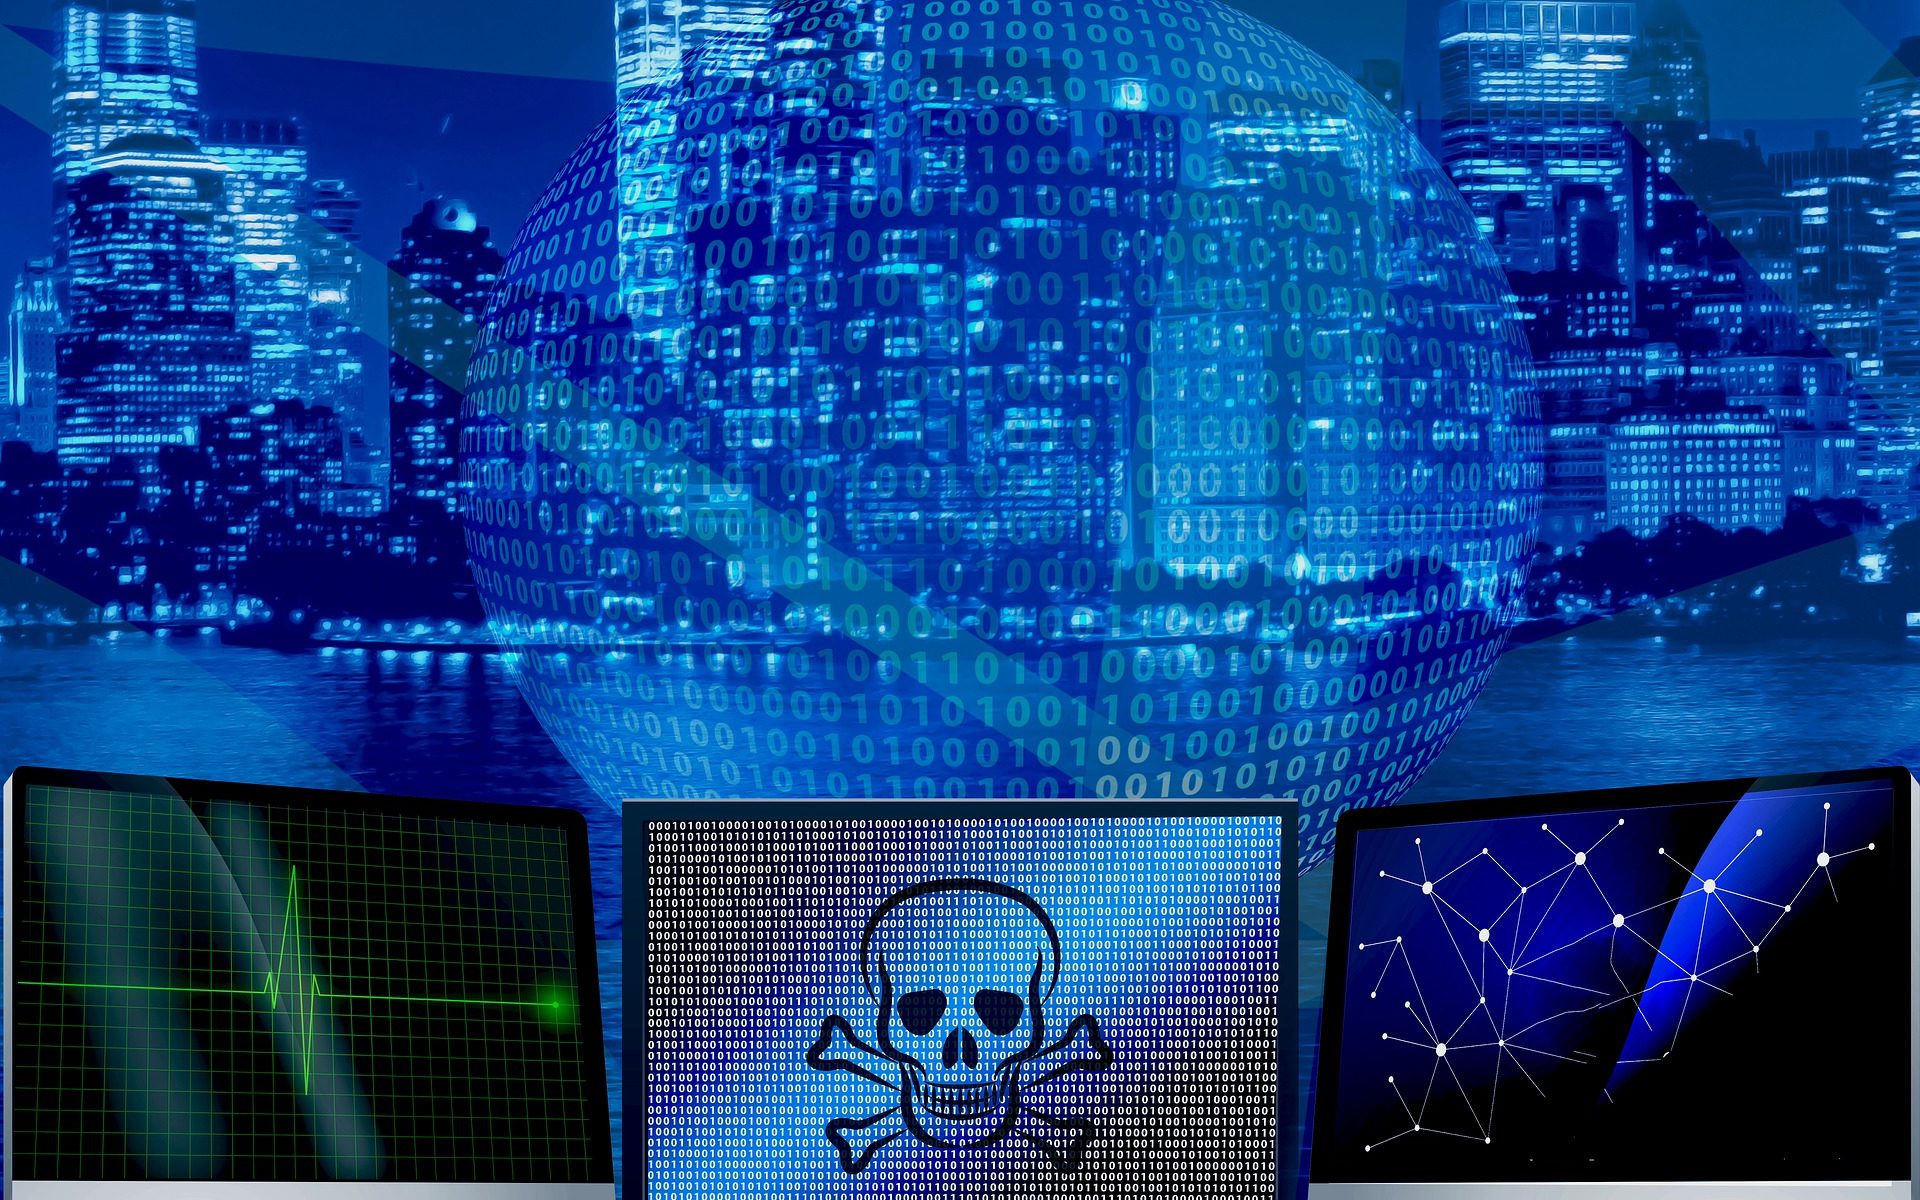 three computer monitors, one with skull and crossbones, in front of binary globe with a large city in background